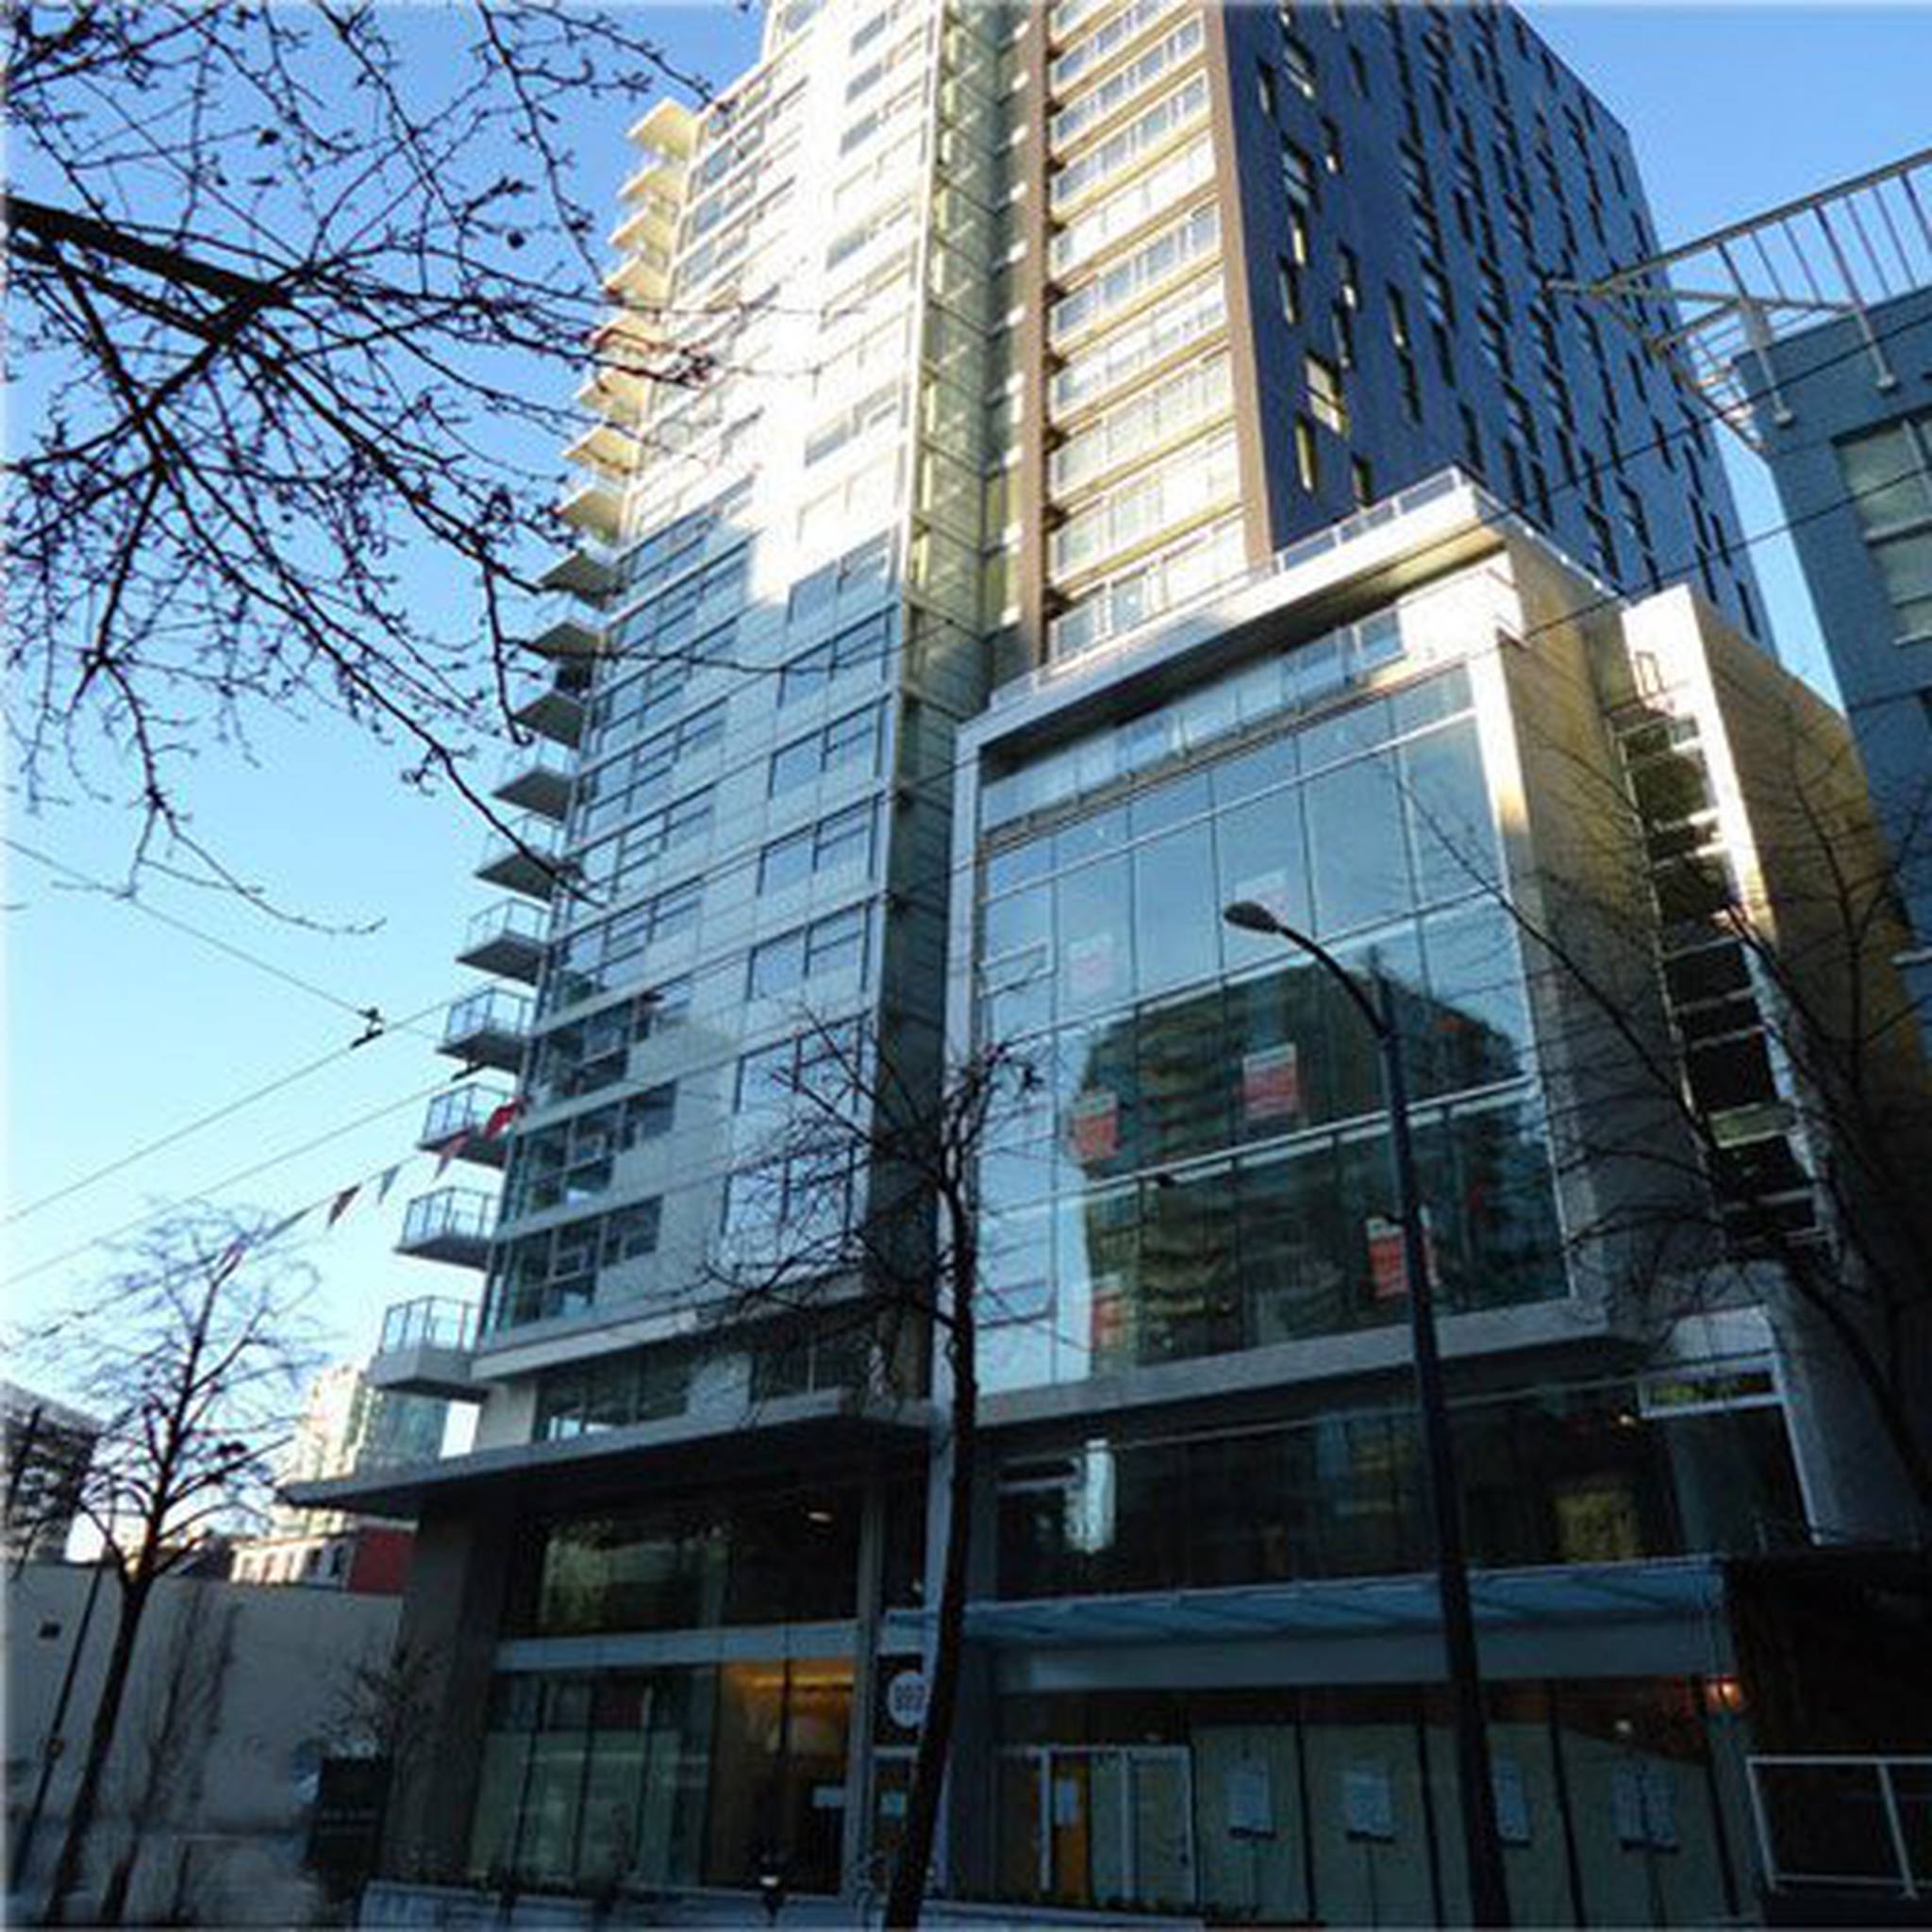 999 Seymour 999 Seymour Street - Apartments for Rent Vancouver | liv.rent